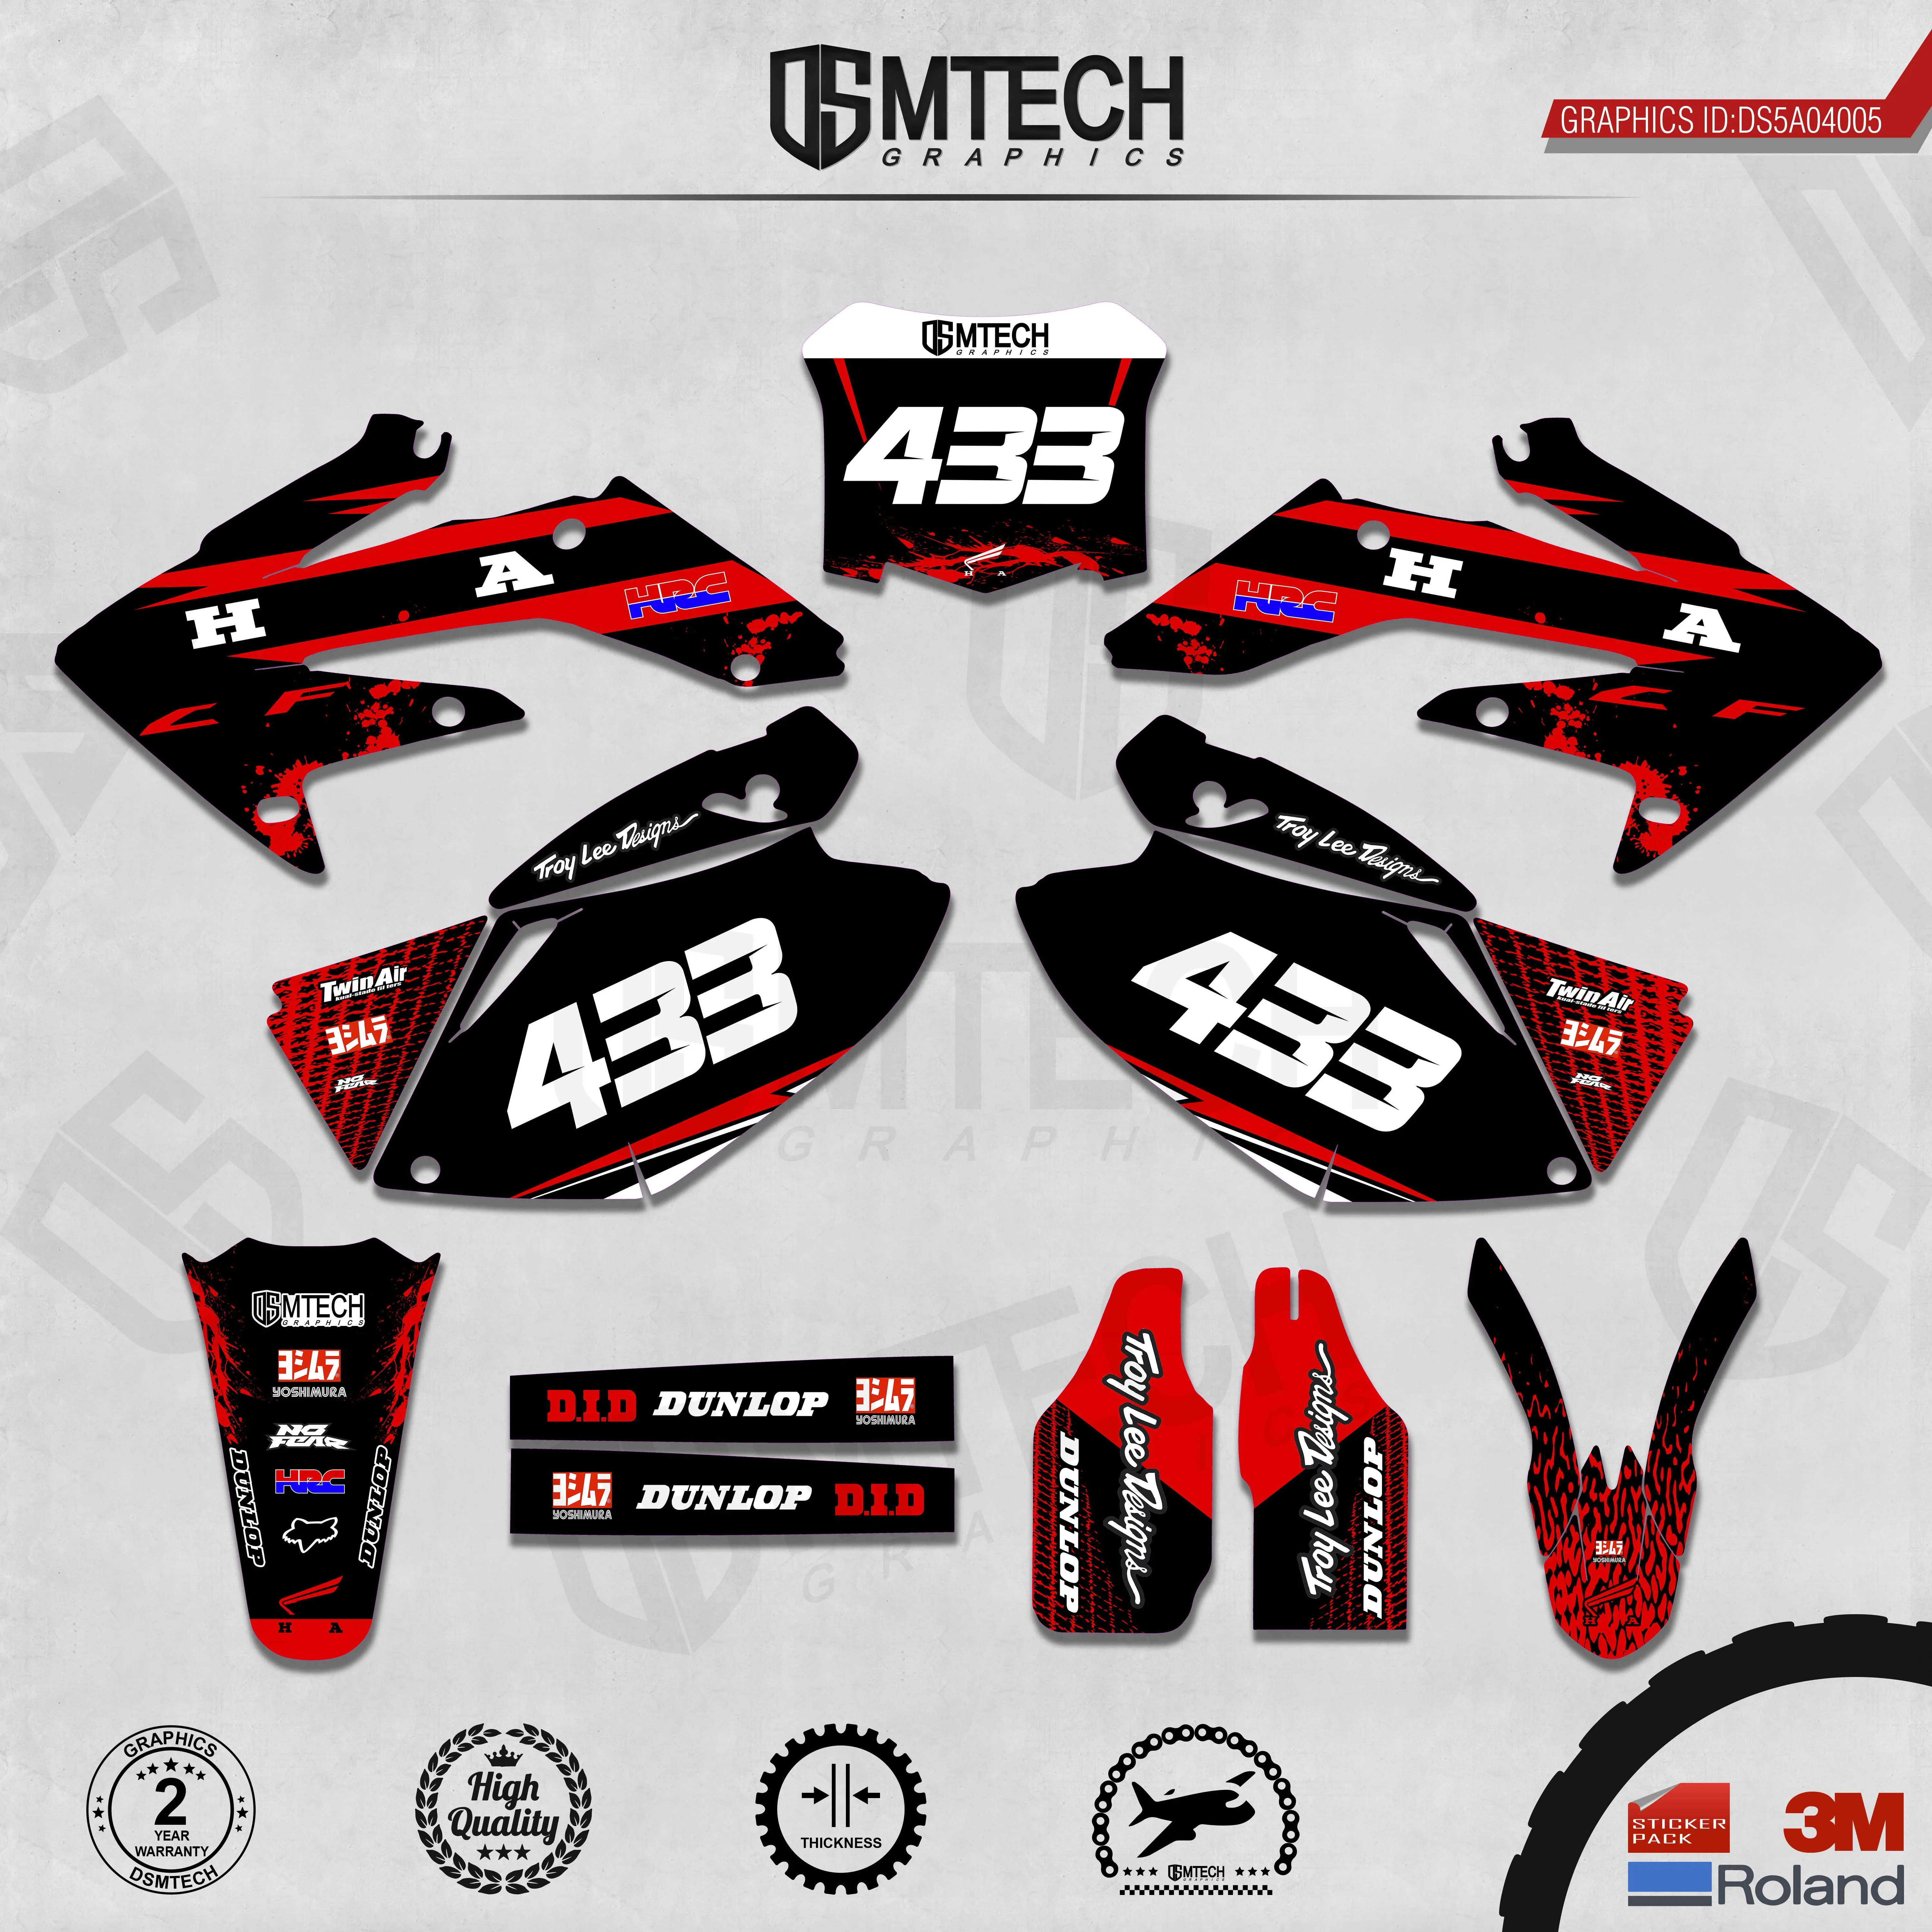 DSMTECH Customized Team Graphics Backgrounds Decals 3M Custom Stickers For 2004-2005 2006-2007 2008-2009 CRF250R 005